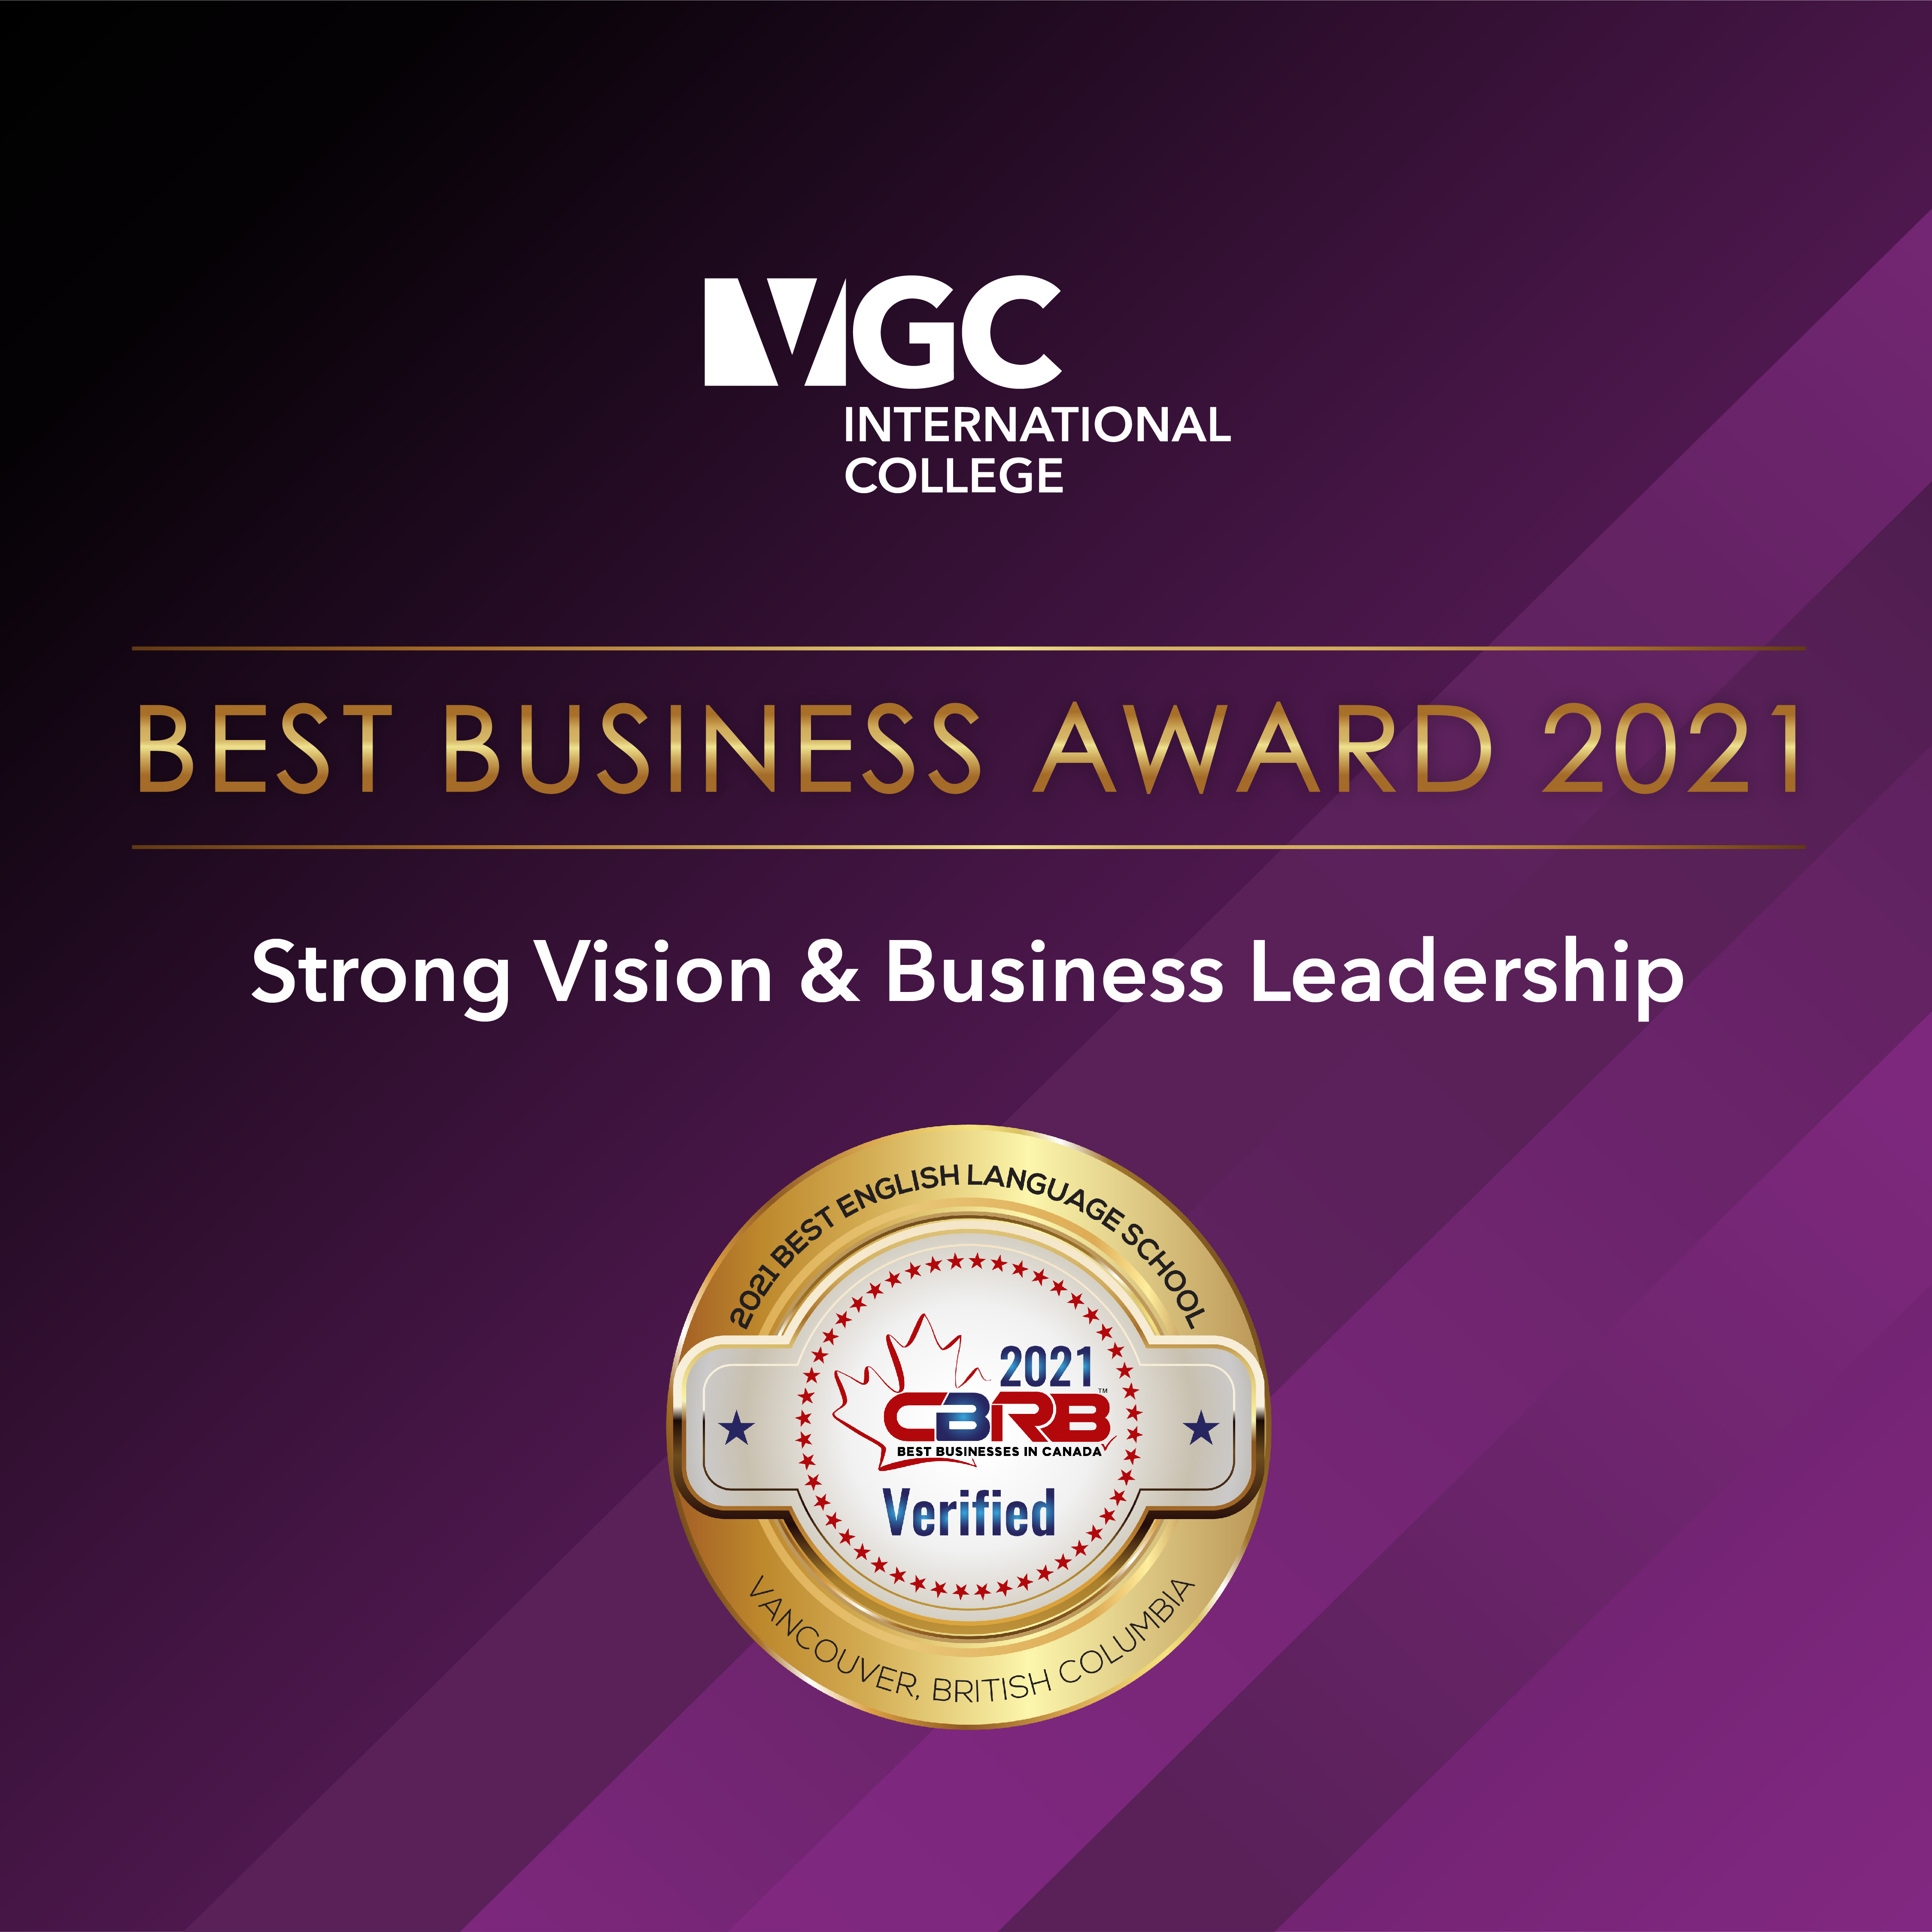 VGC International College wins Canadian Business Review Board (CBRB) as